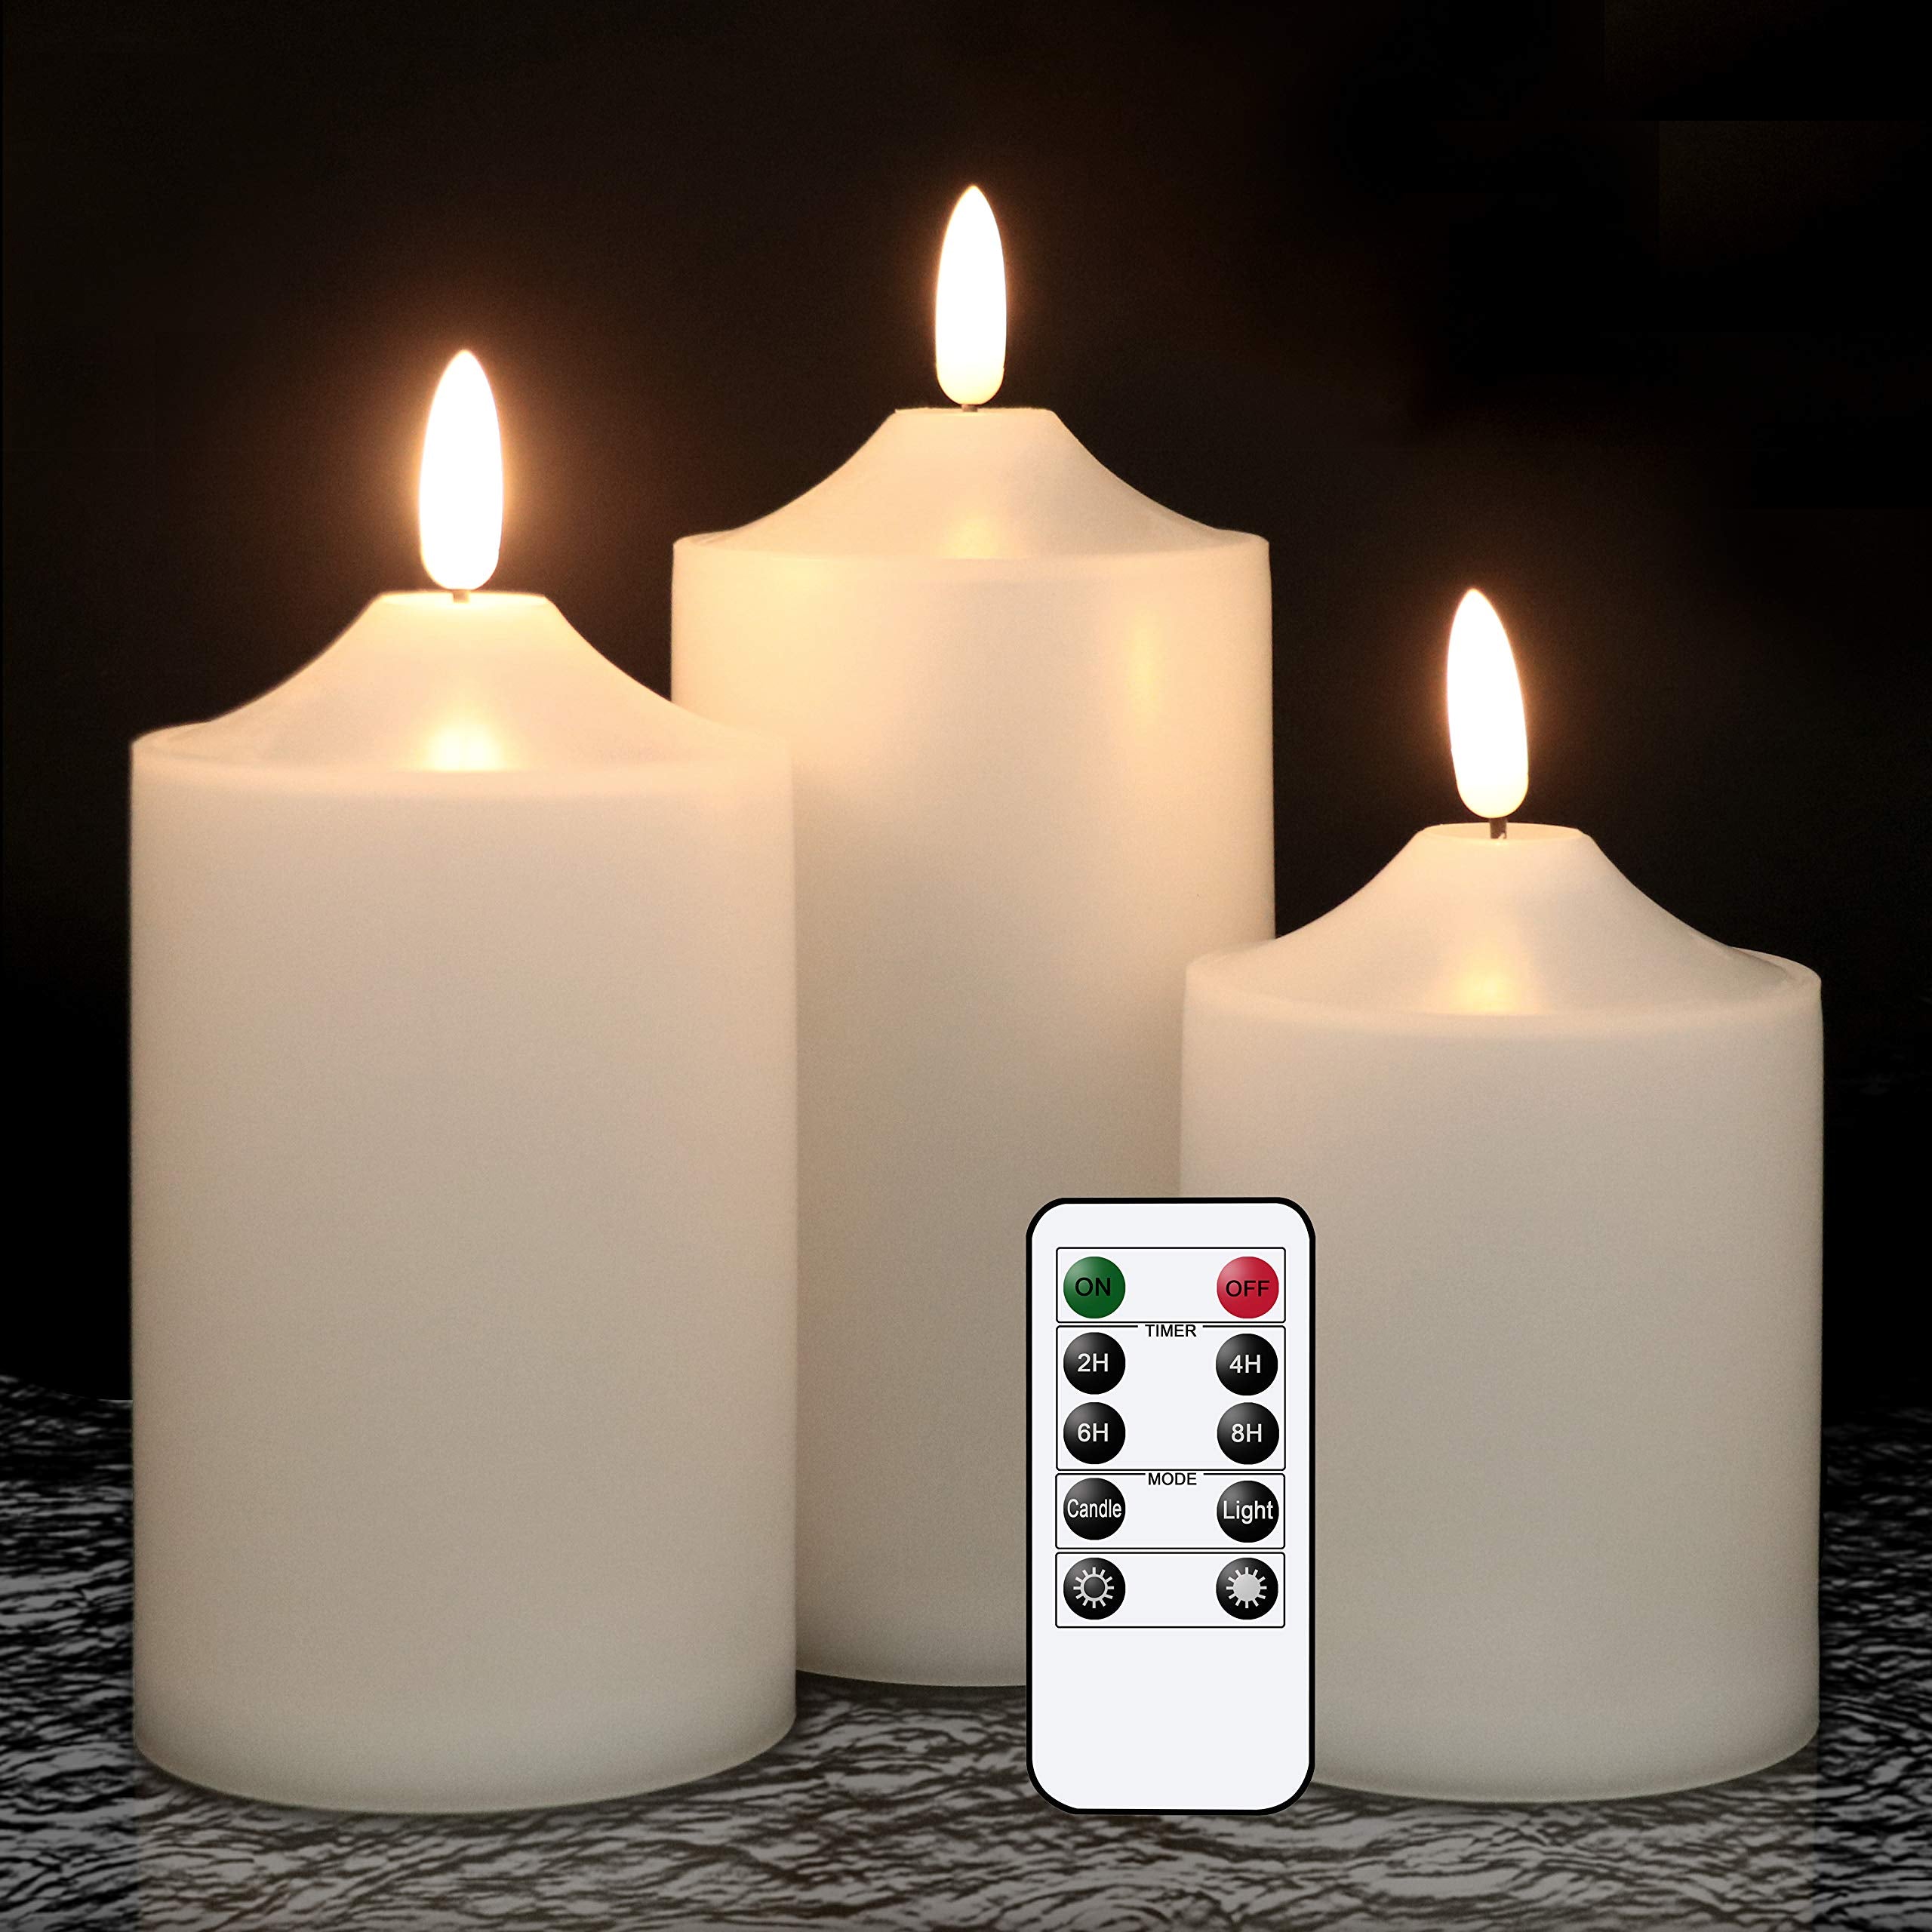 Eldnacele Flickering Flameless Candles, Waterproof Battery Operated LED Candles with Remote Timer, White Pillar Candles for Indoor Outdoor Home Garden Lantern Decoration (Pack of 3)